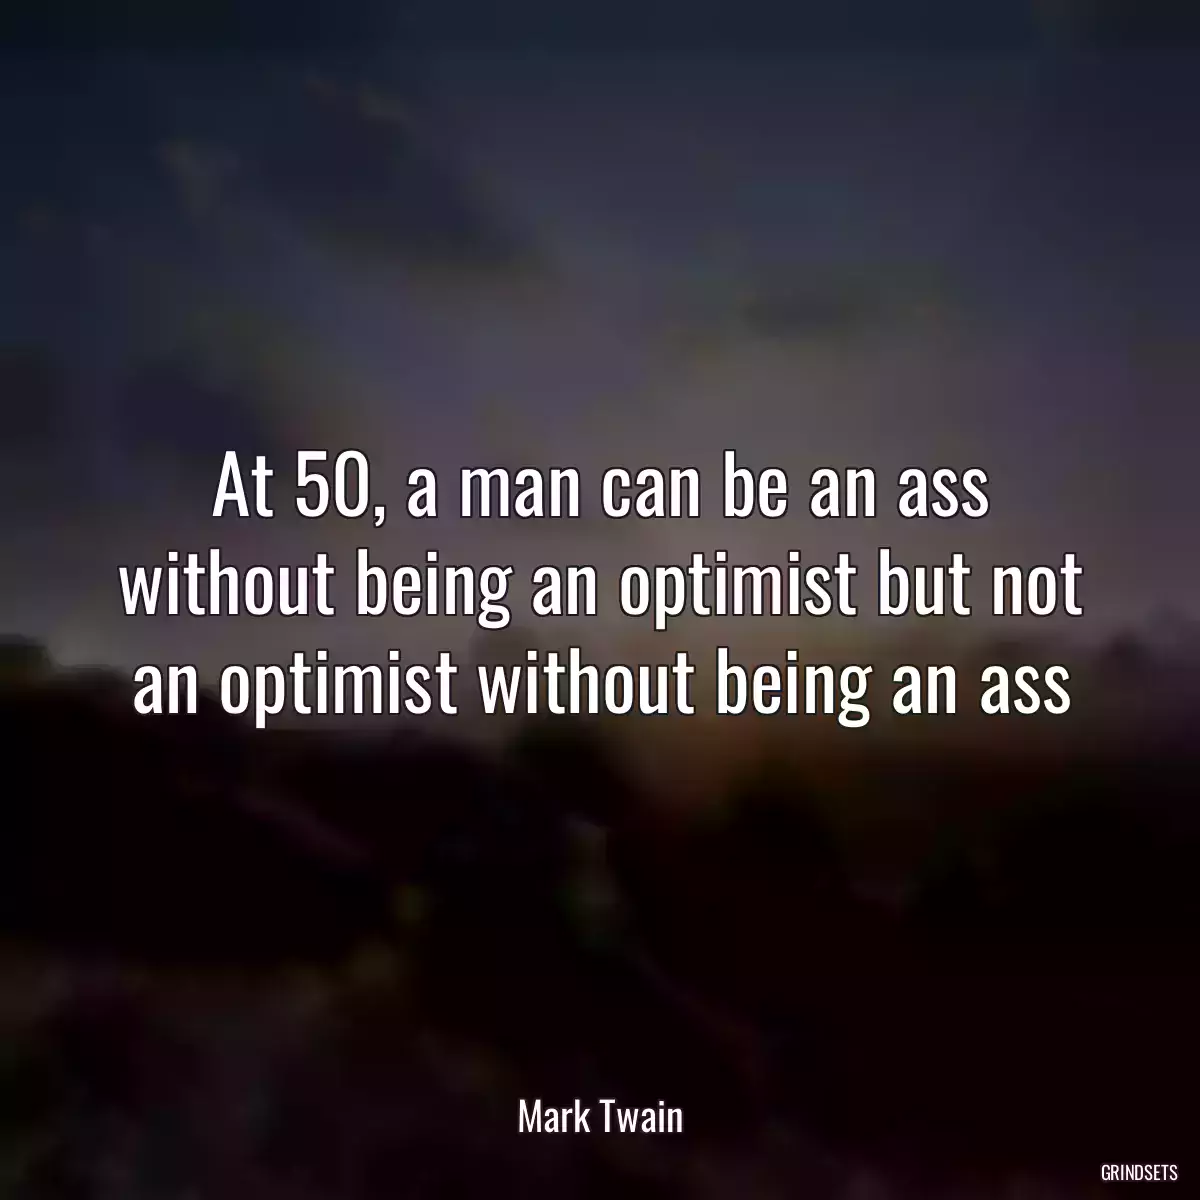 At 50, a man can be an ass without being an optimist but not an optimist without being an ass